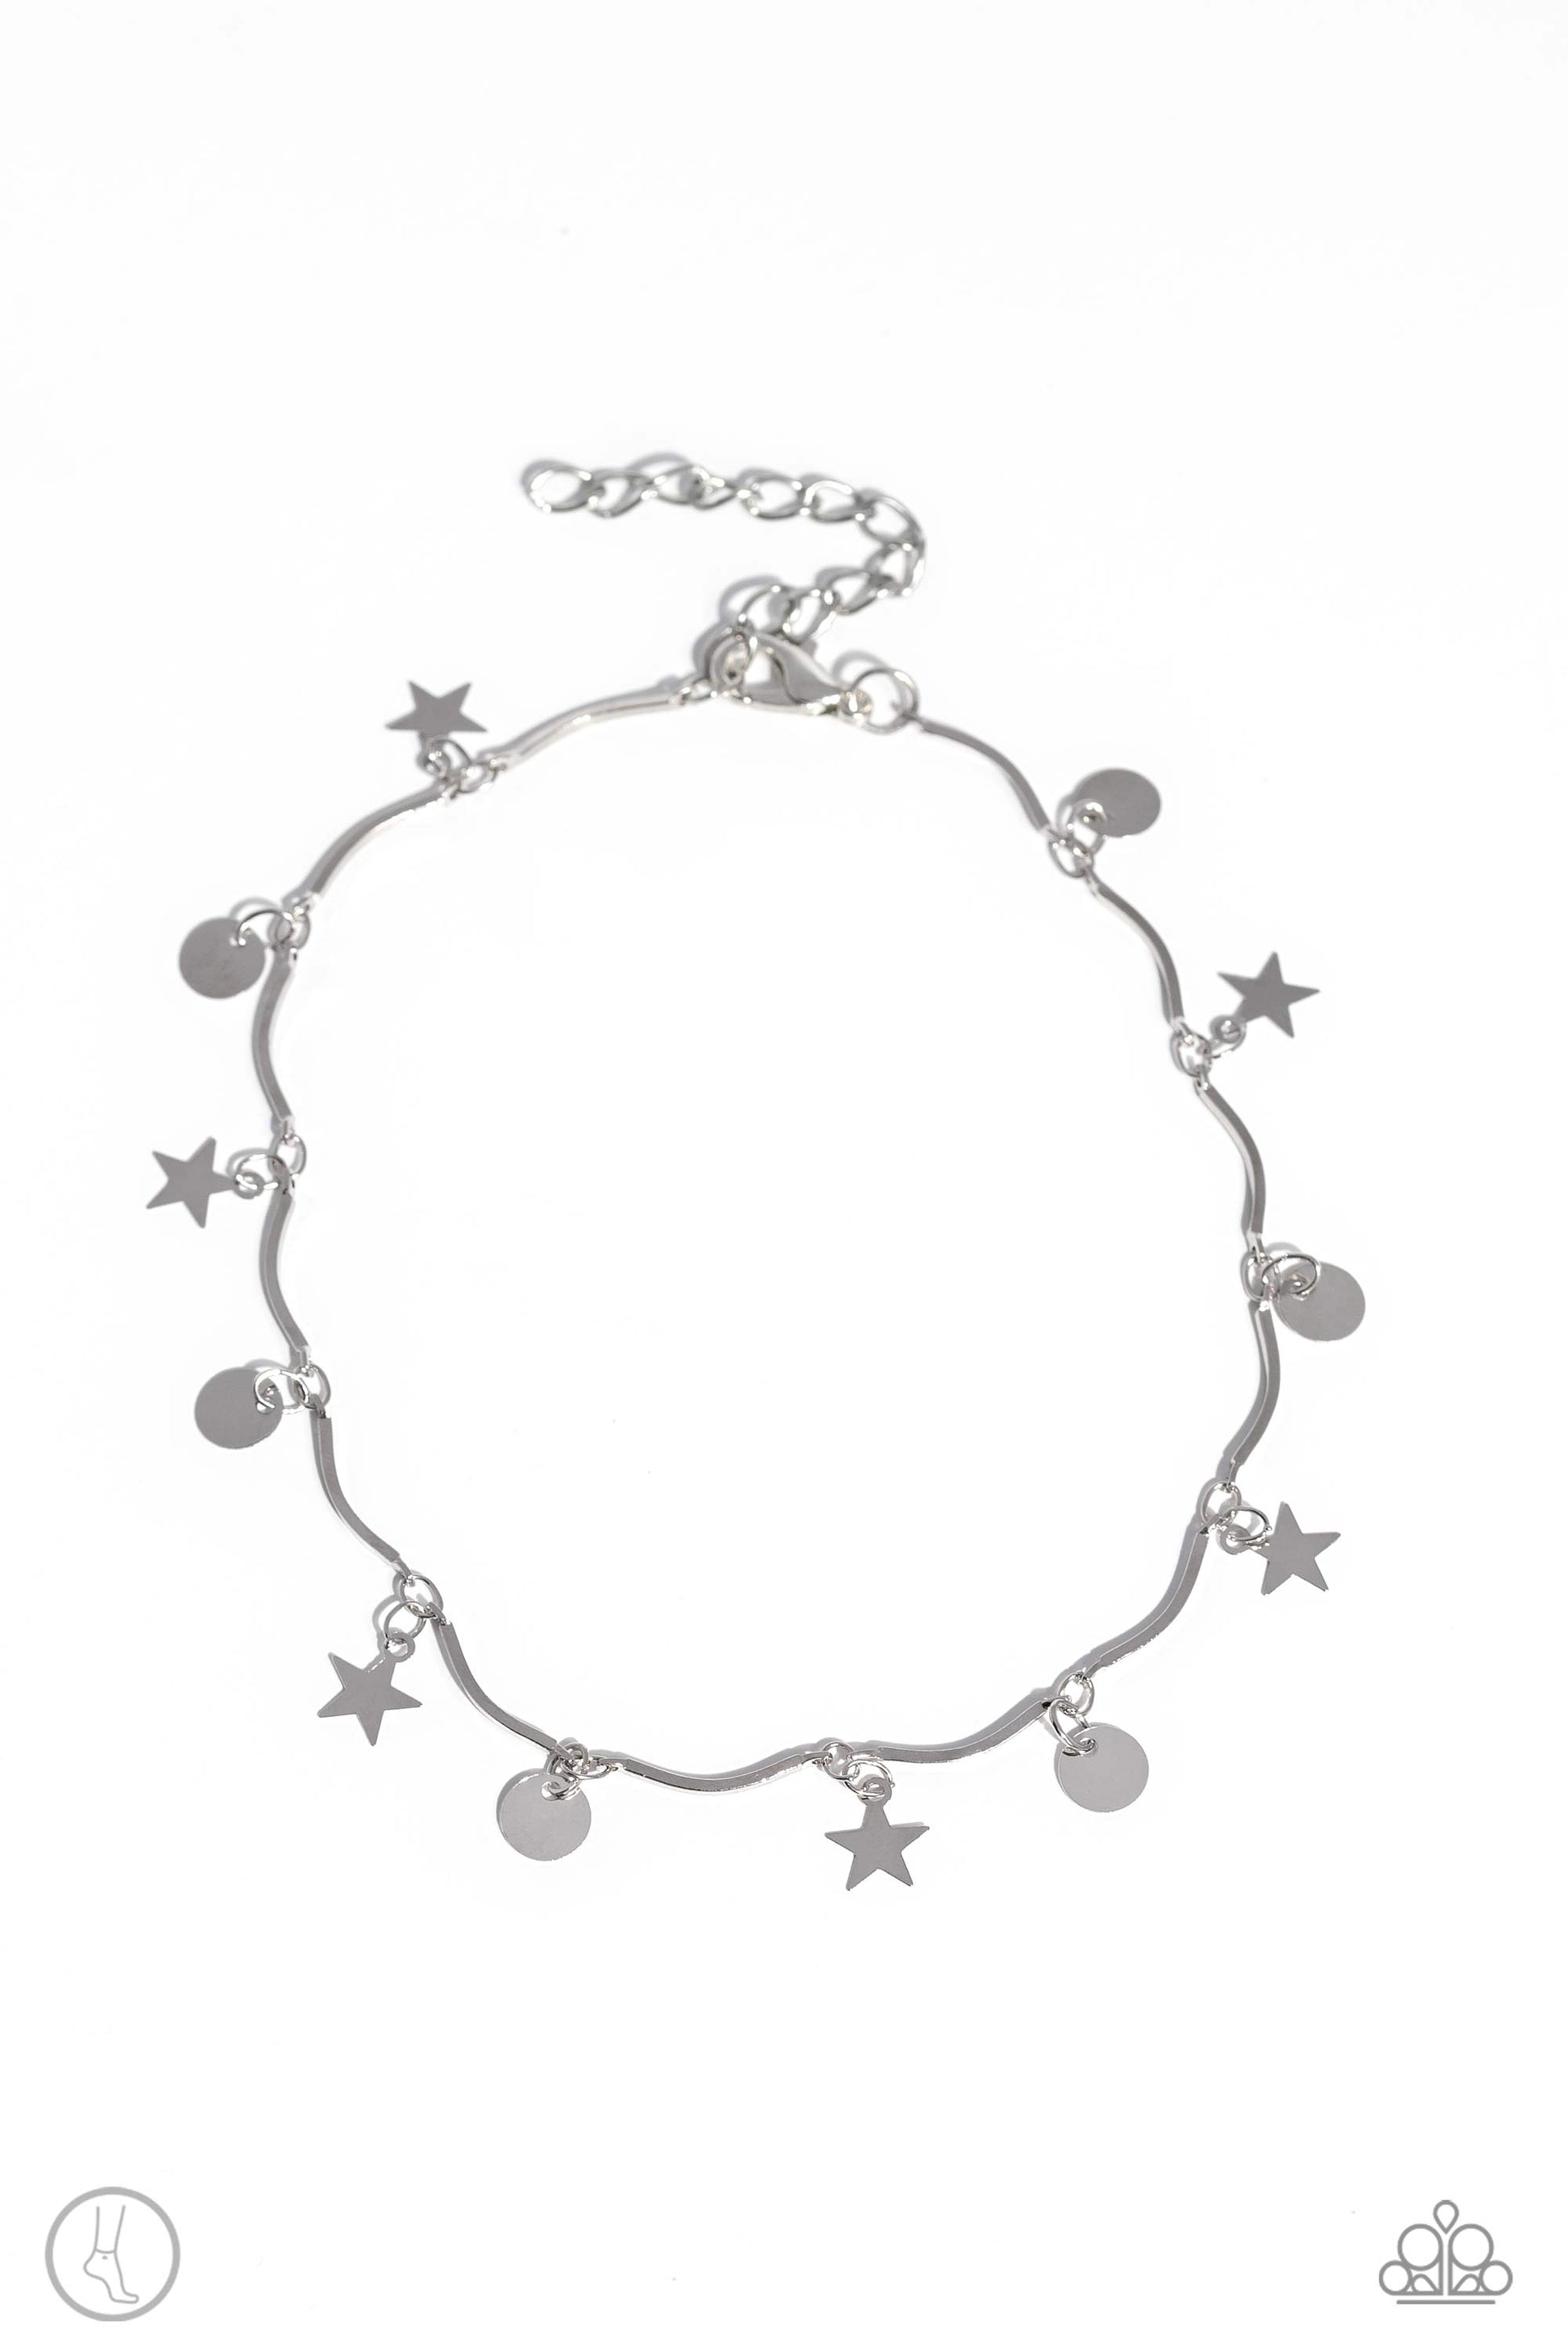 BEACH You To It - Silver Anklet - Paparazzi Accessories - A fringe of sleek silver stars and discs swings from a dainty silver overlay chain, creating whimsical movement around the ankle. Features an adjustable clasp closure. Sold as one individual anklet.